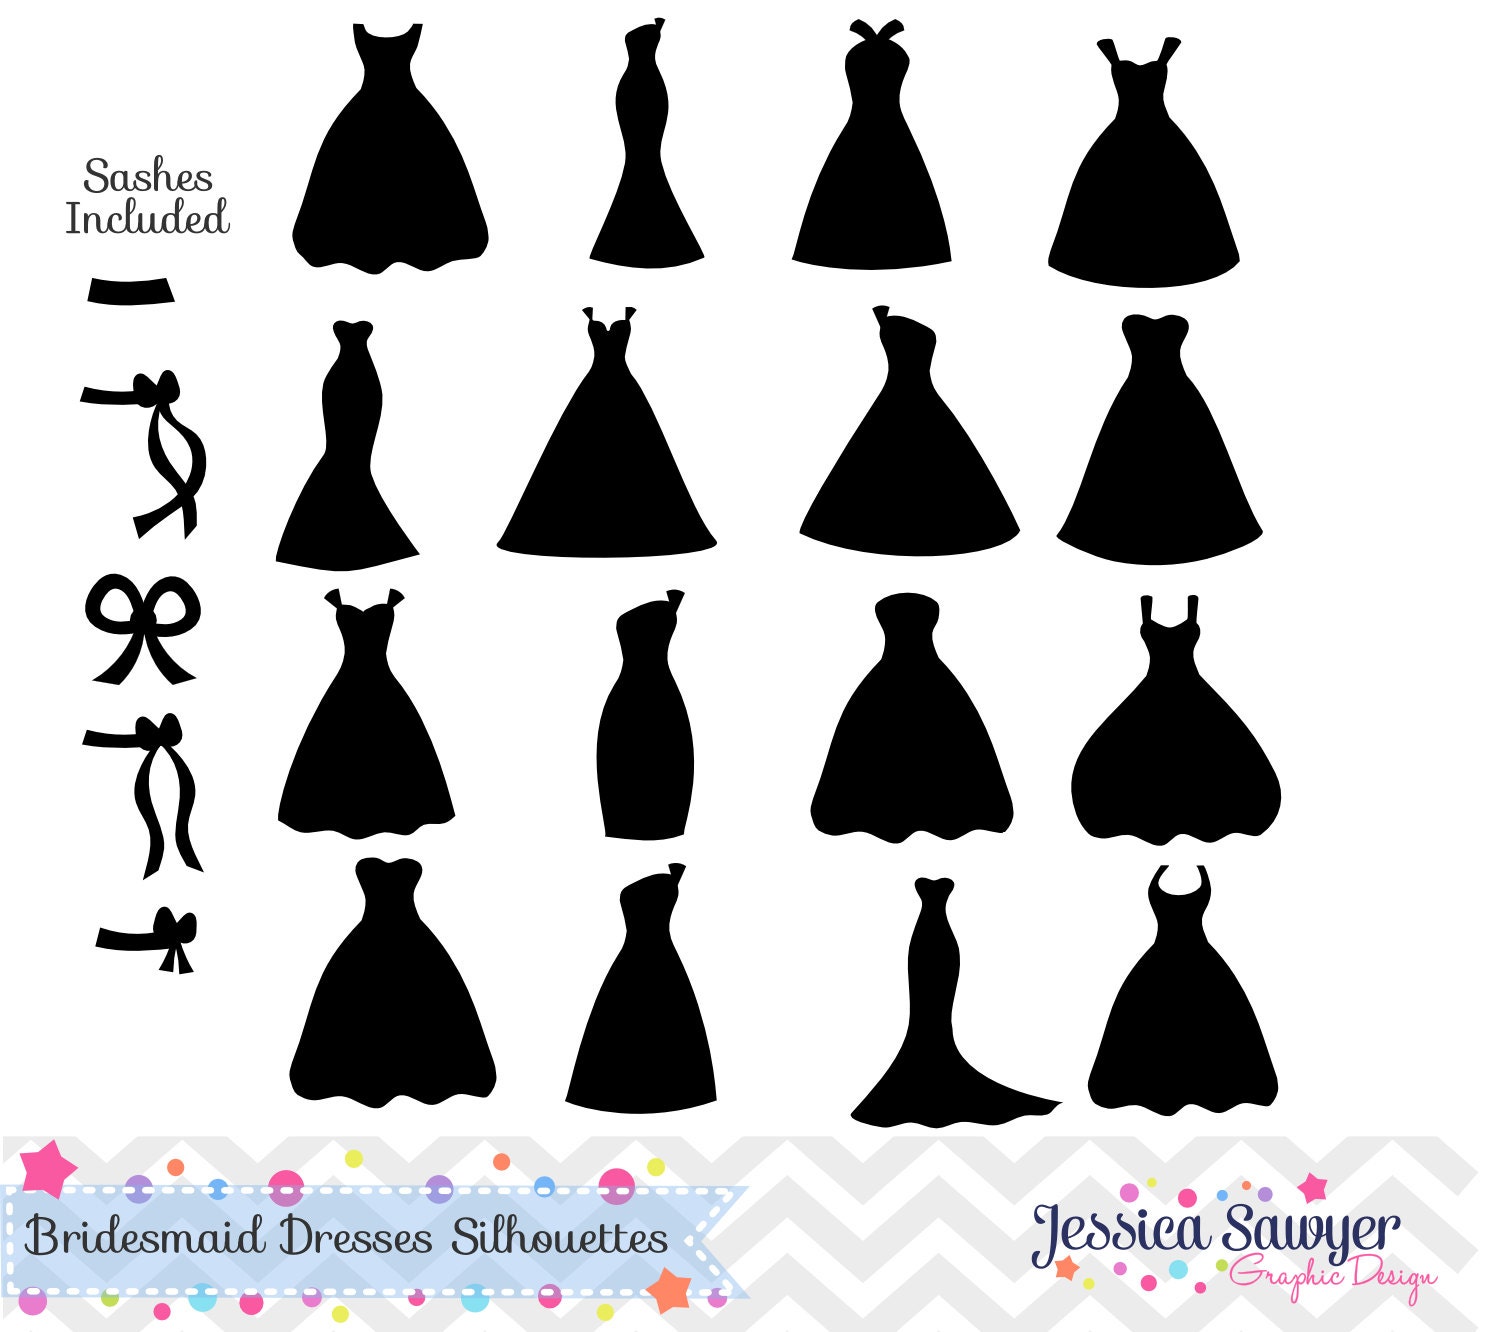 Download INSTANT DOWNLOAD bridesmaid dresses silhouettes clipart